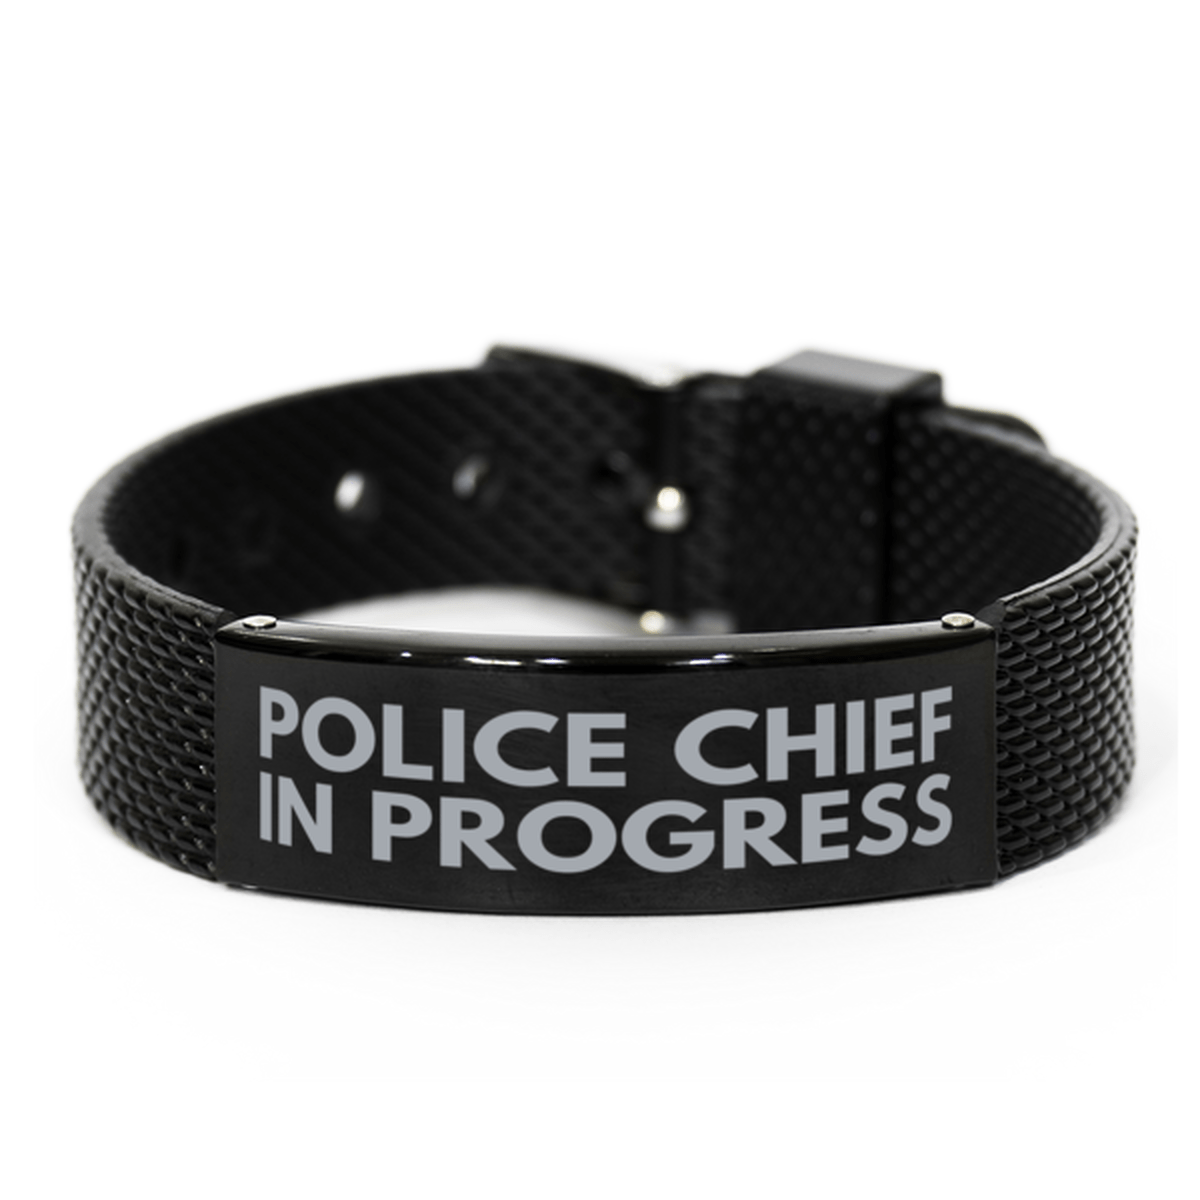 Inspirational Police Chief Black Shark Mesh Bracelet, Police Chief In Progress, Best Graduation Gifts for Students